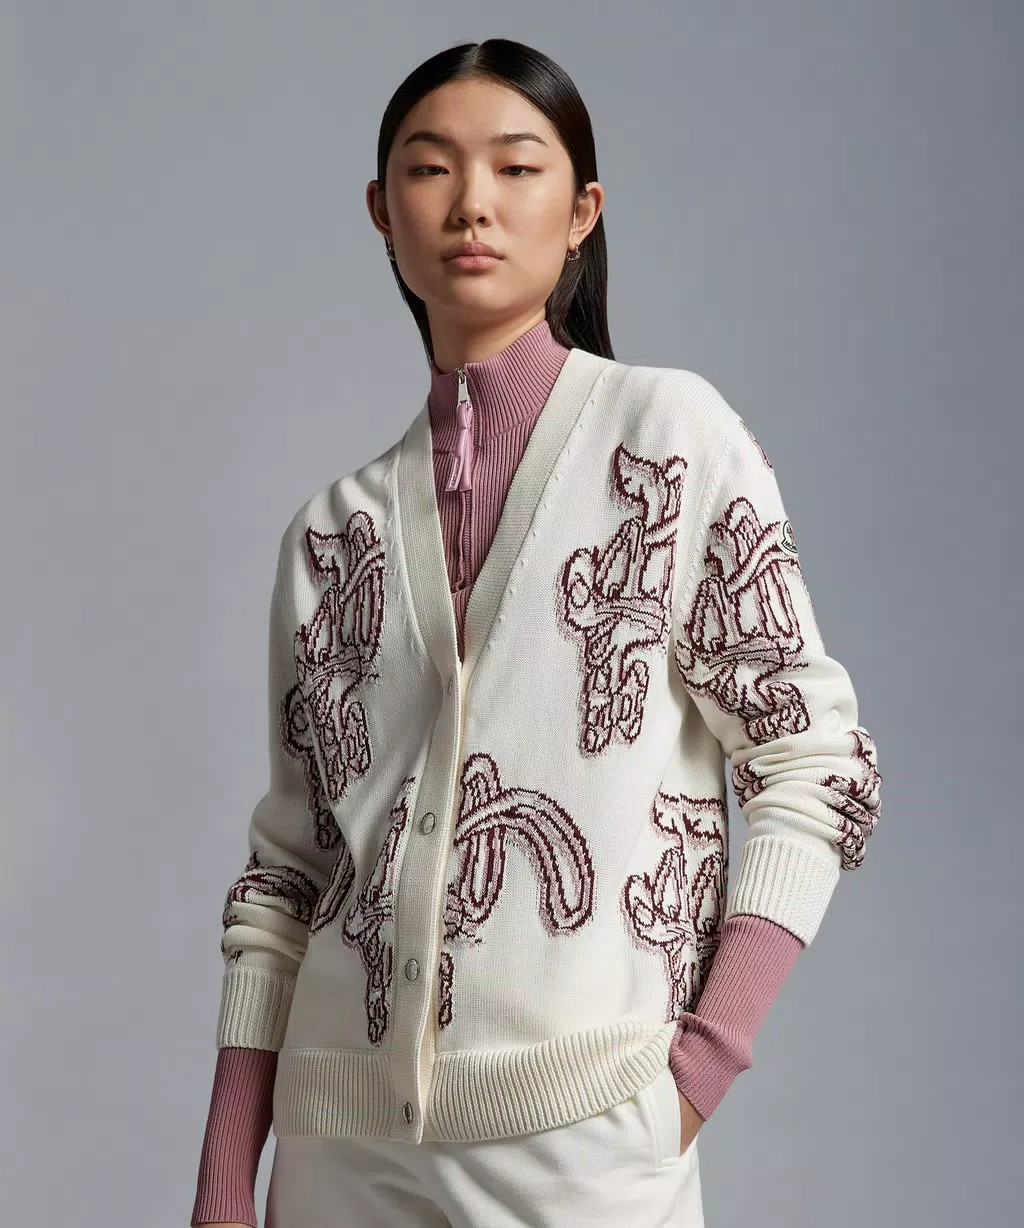 Image of a model wearing a white Moncler cardigan with red rabit motifs throughout. She wears a red and white shirt underneath.